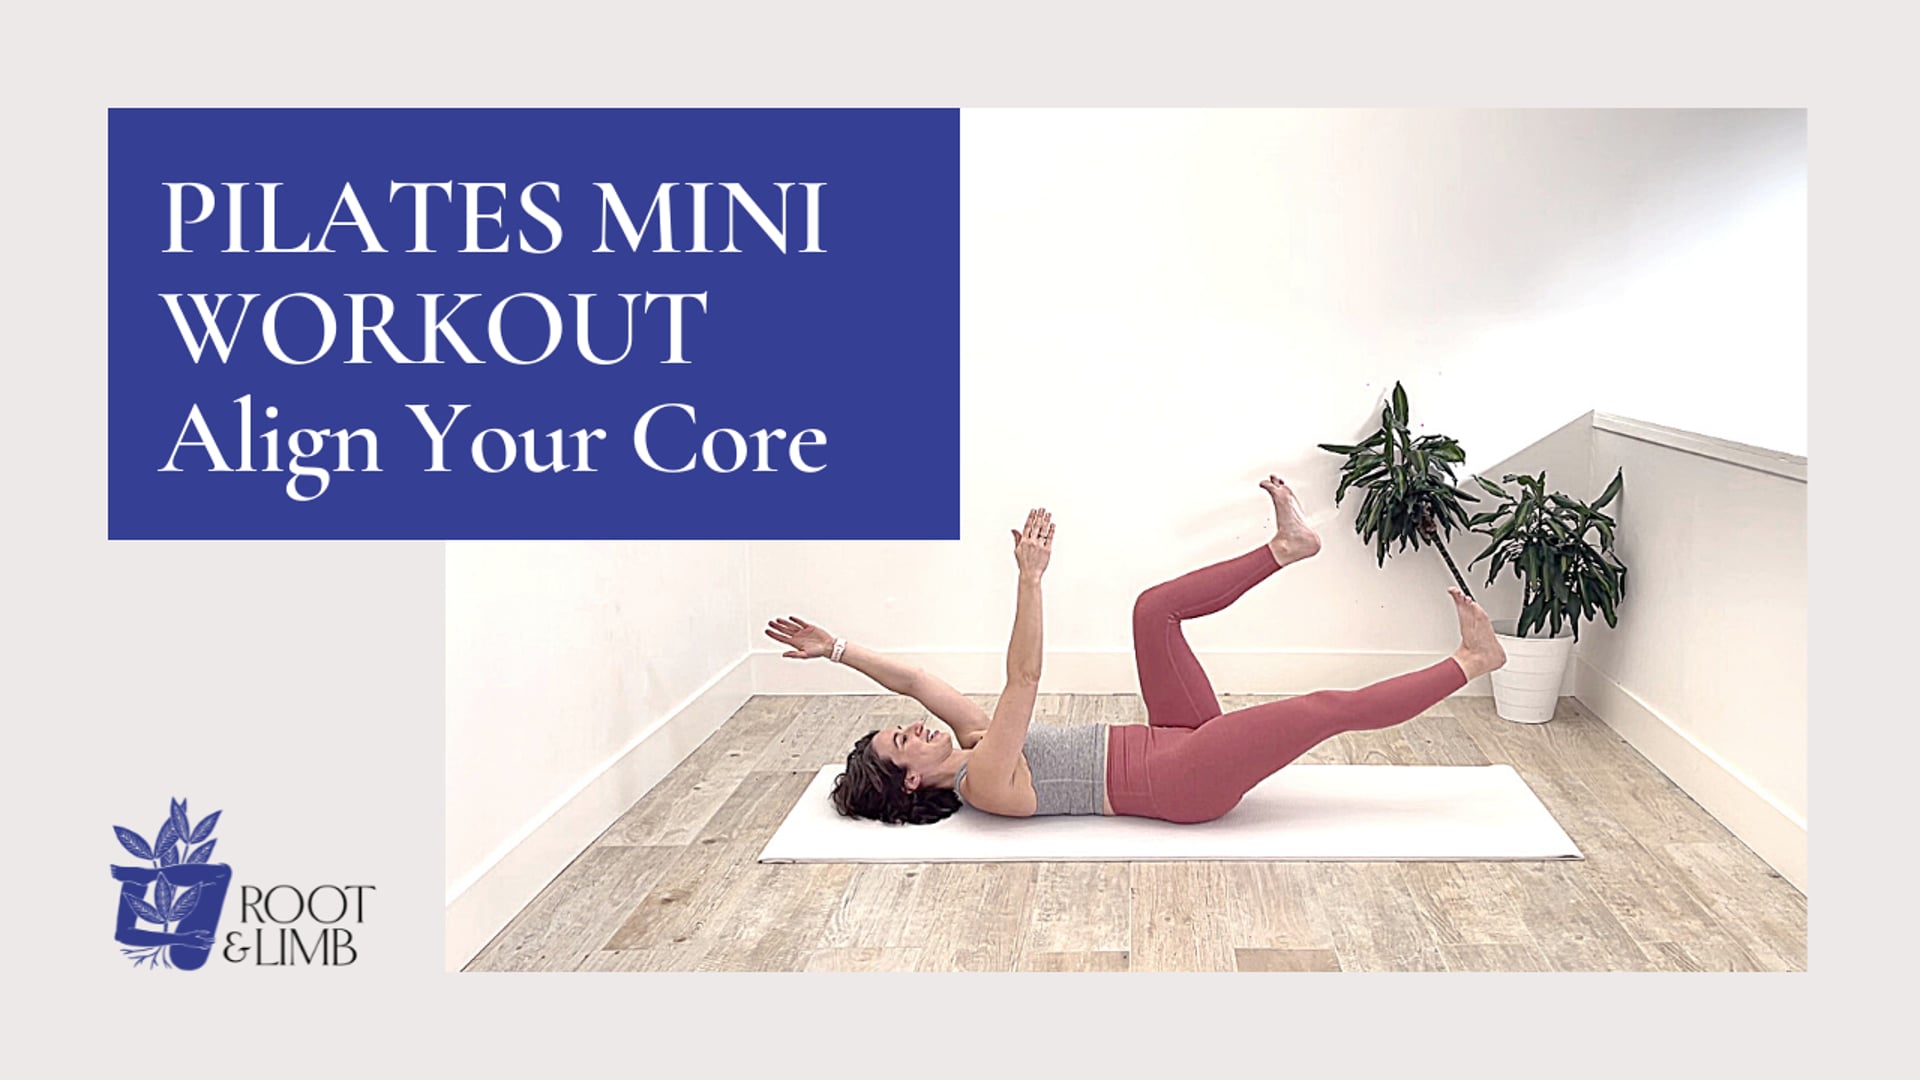 Align Your Core 